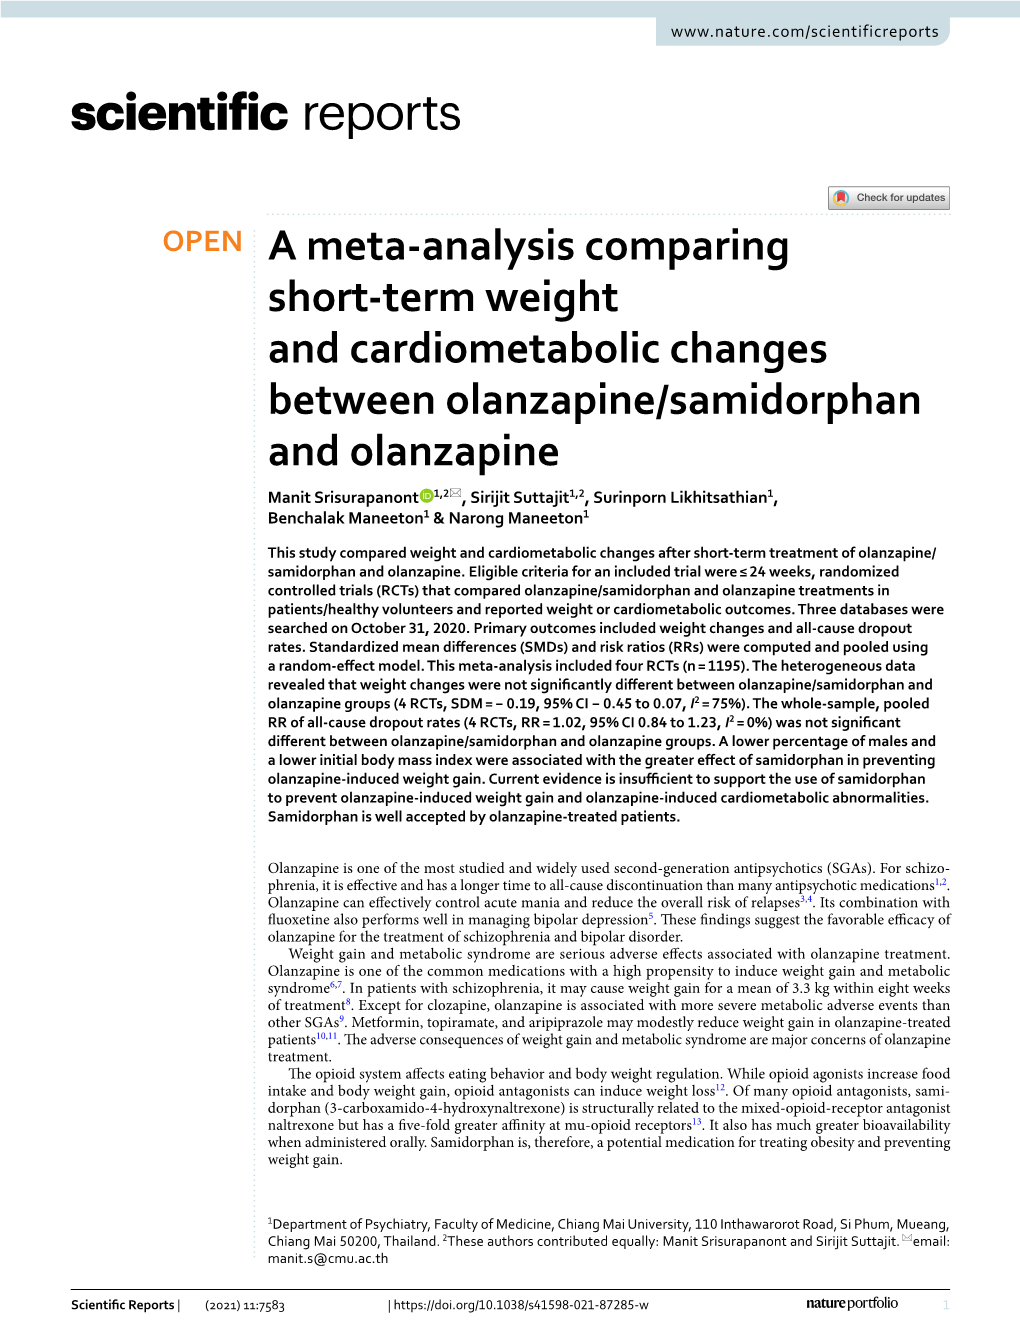 A Meta-Analysis Comparing Short-Term Weight and Cardiometabolic